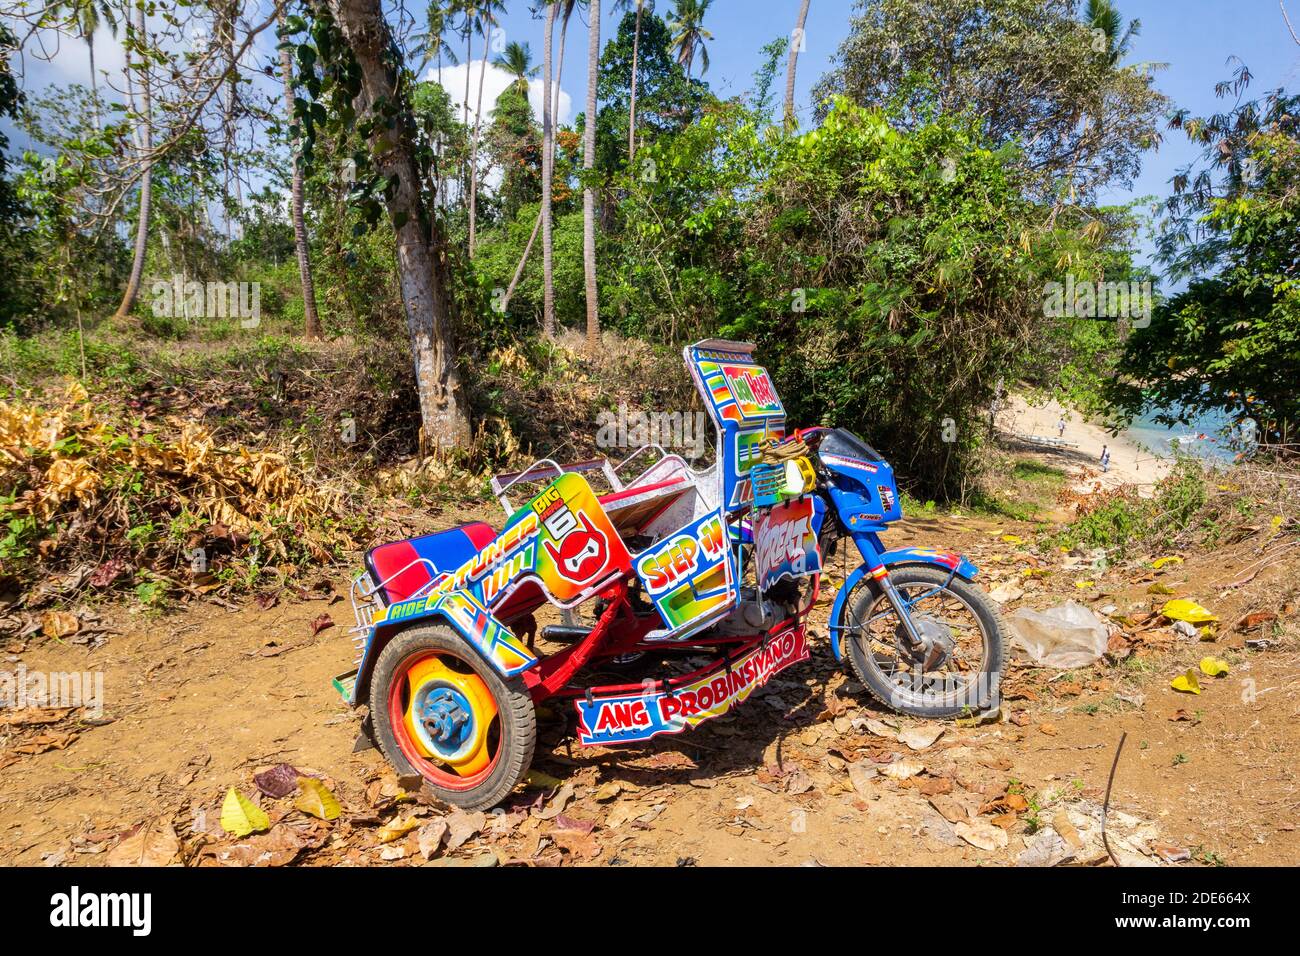 A custom built tricycle, a local passenger vehicle in Sulu, Philippines Stock Photo